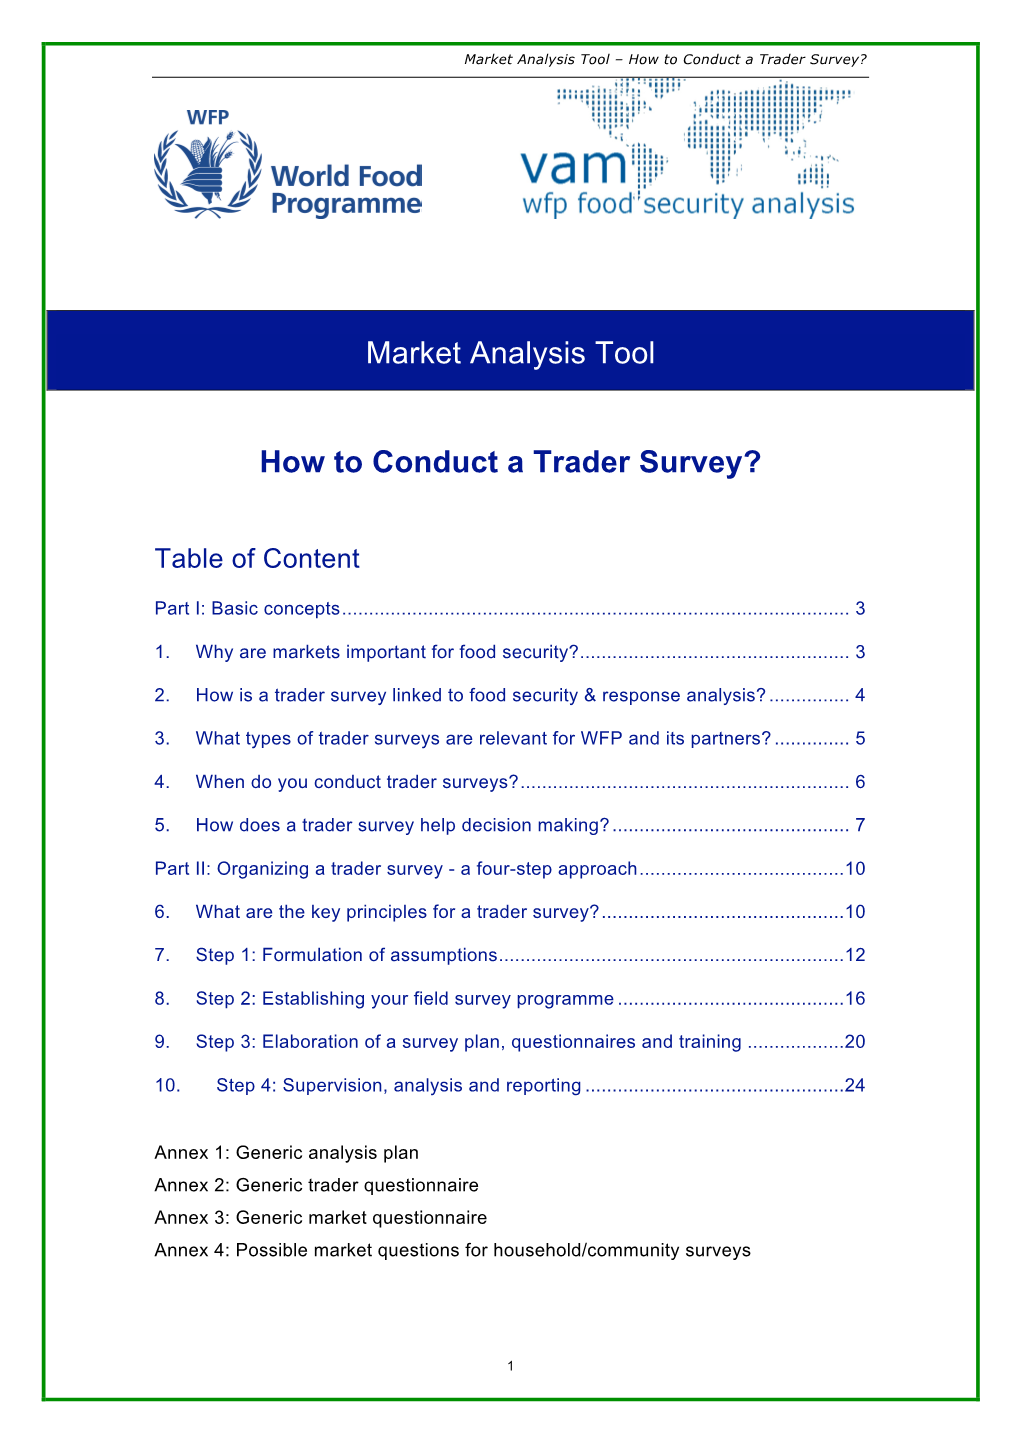 Market Analysis Tool How to Conduct a Trader Survey?